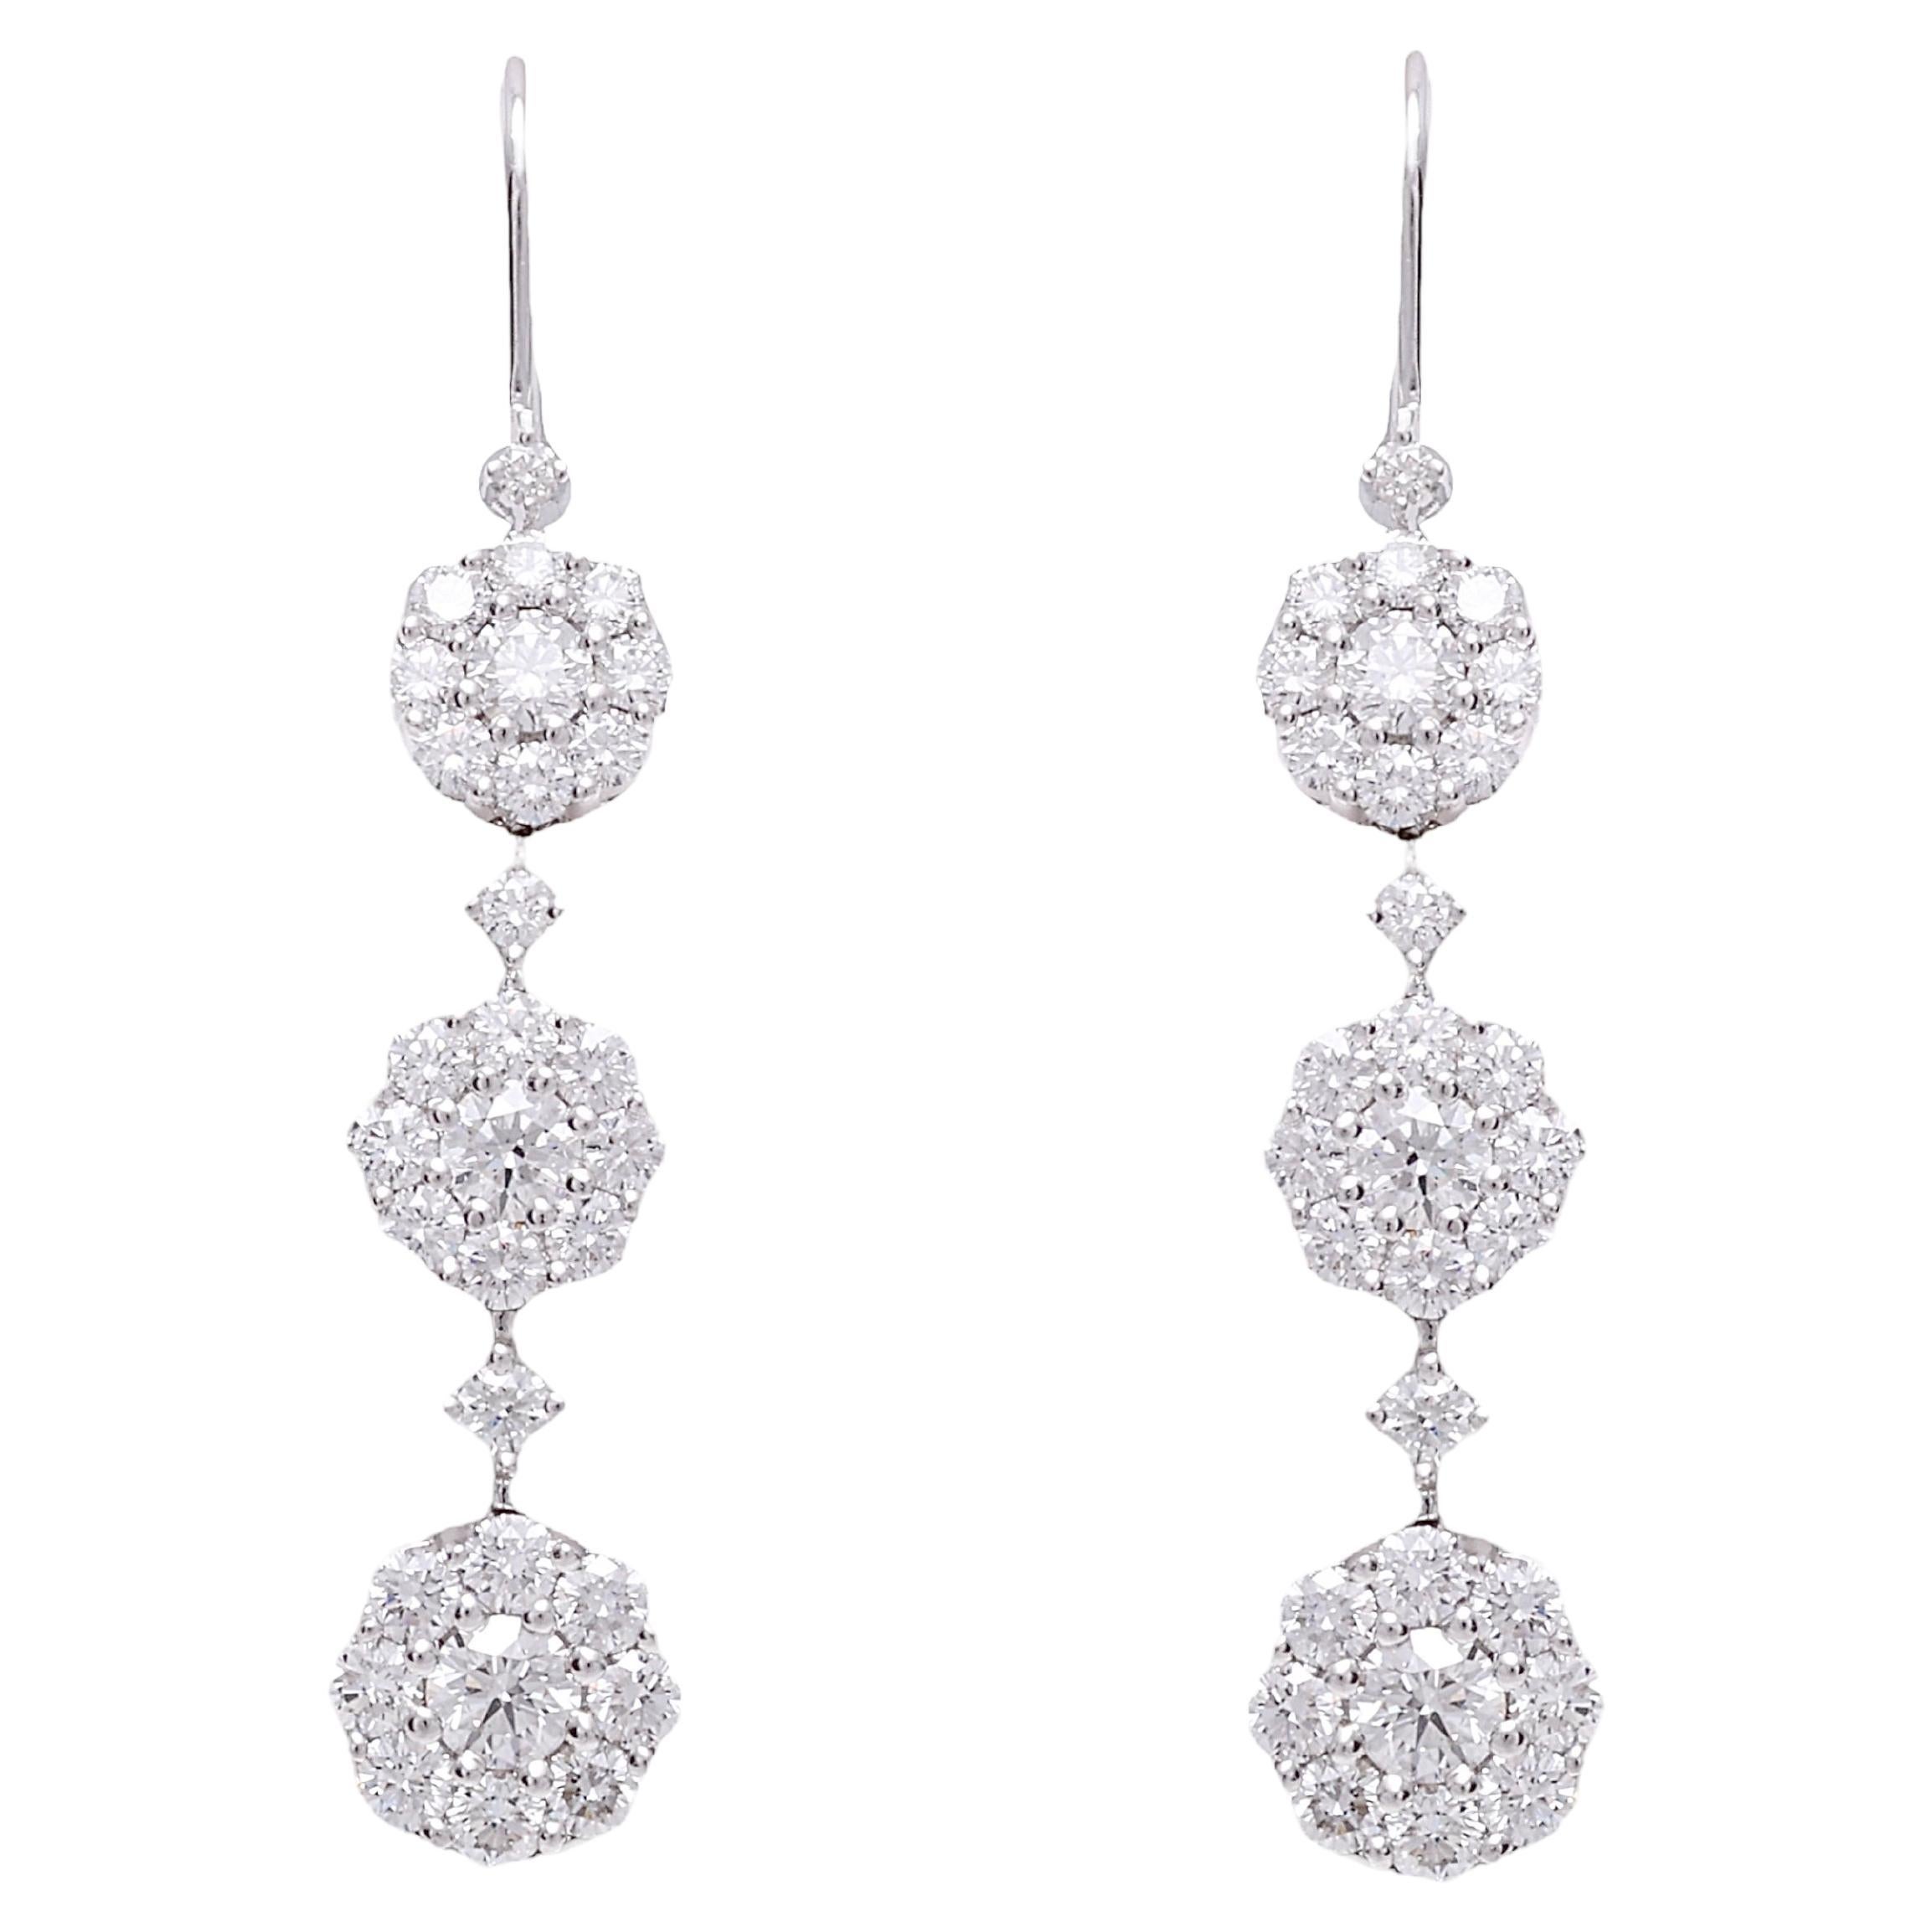 18 kt. White Gold Flower Earrings With 2.66 ct. Diamonds